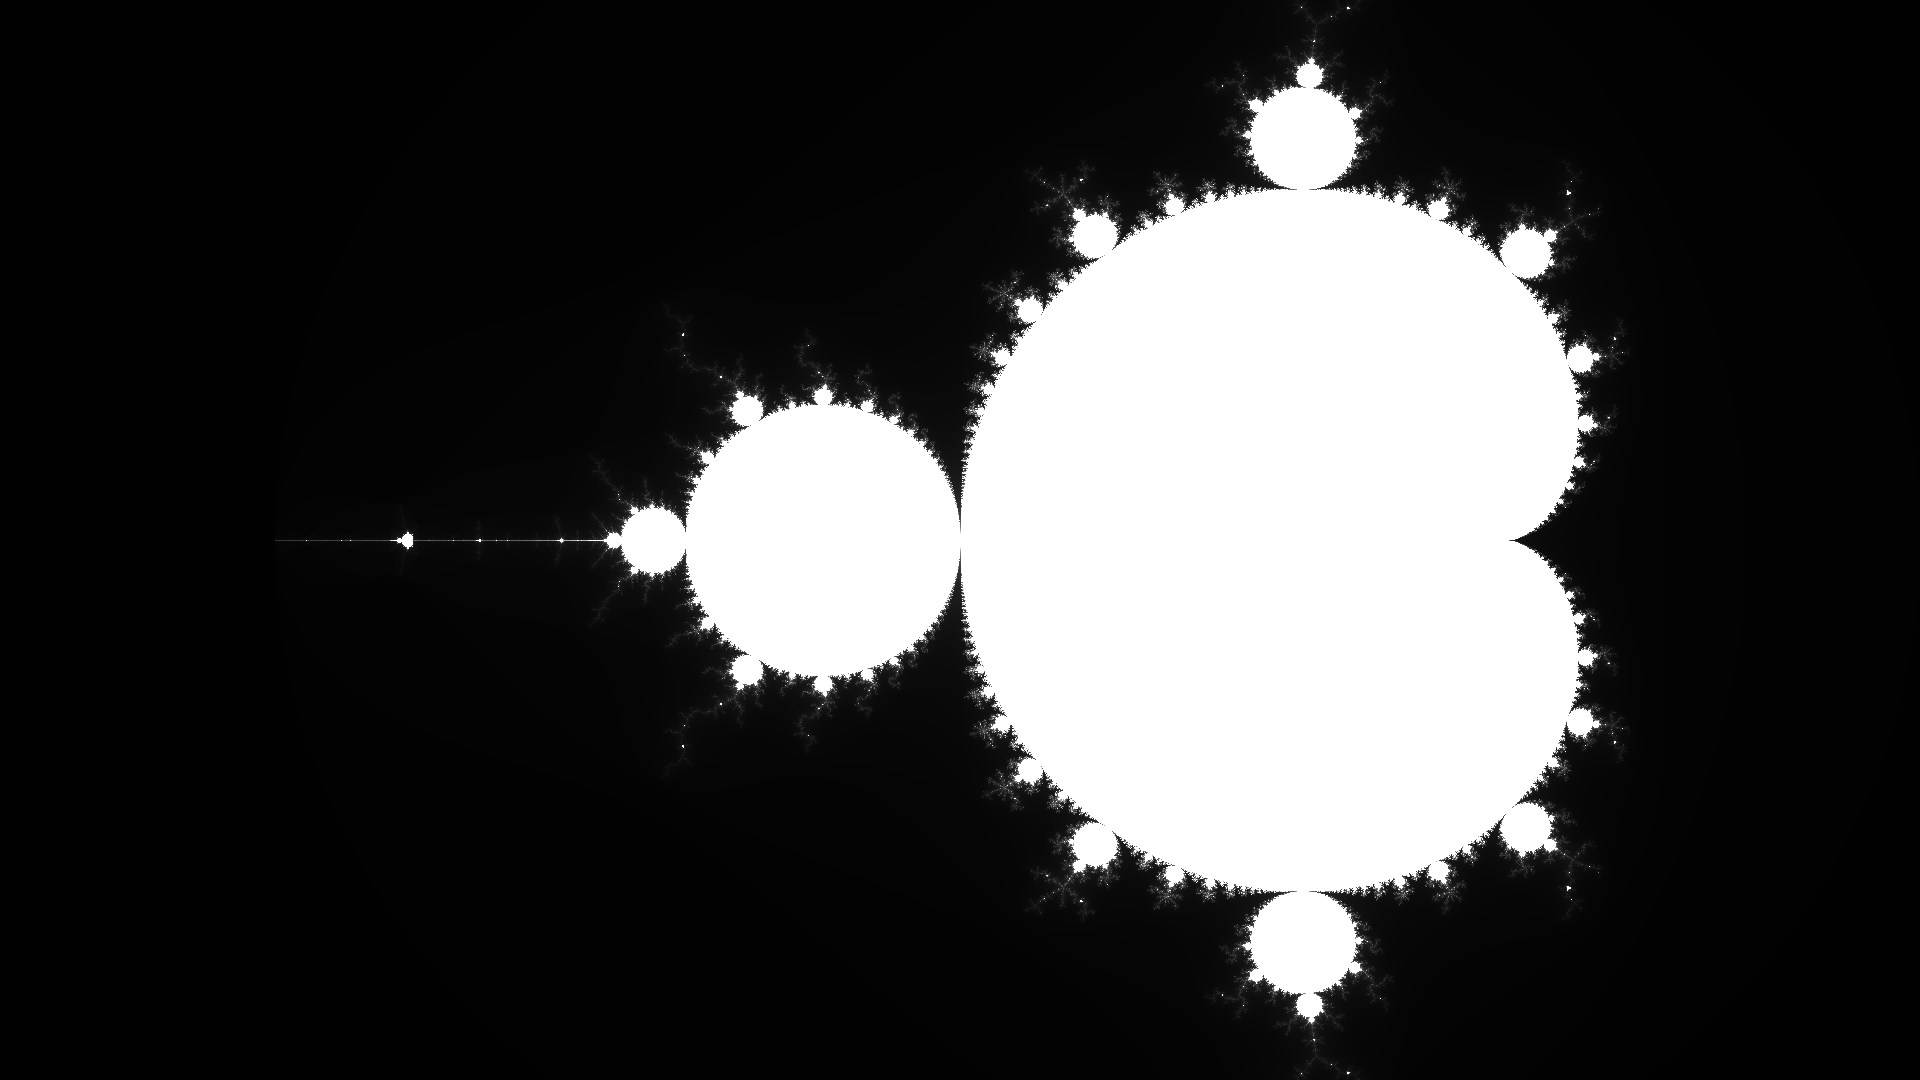 The Mandelbrot set generated with this project